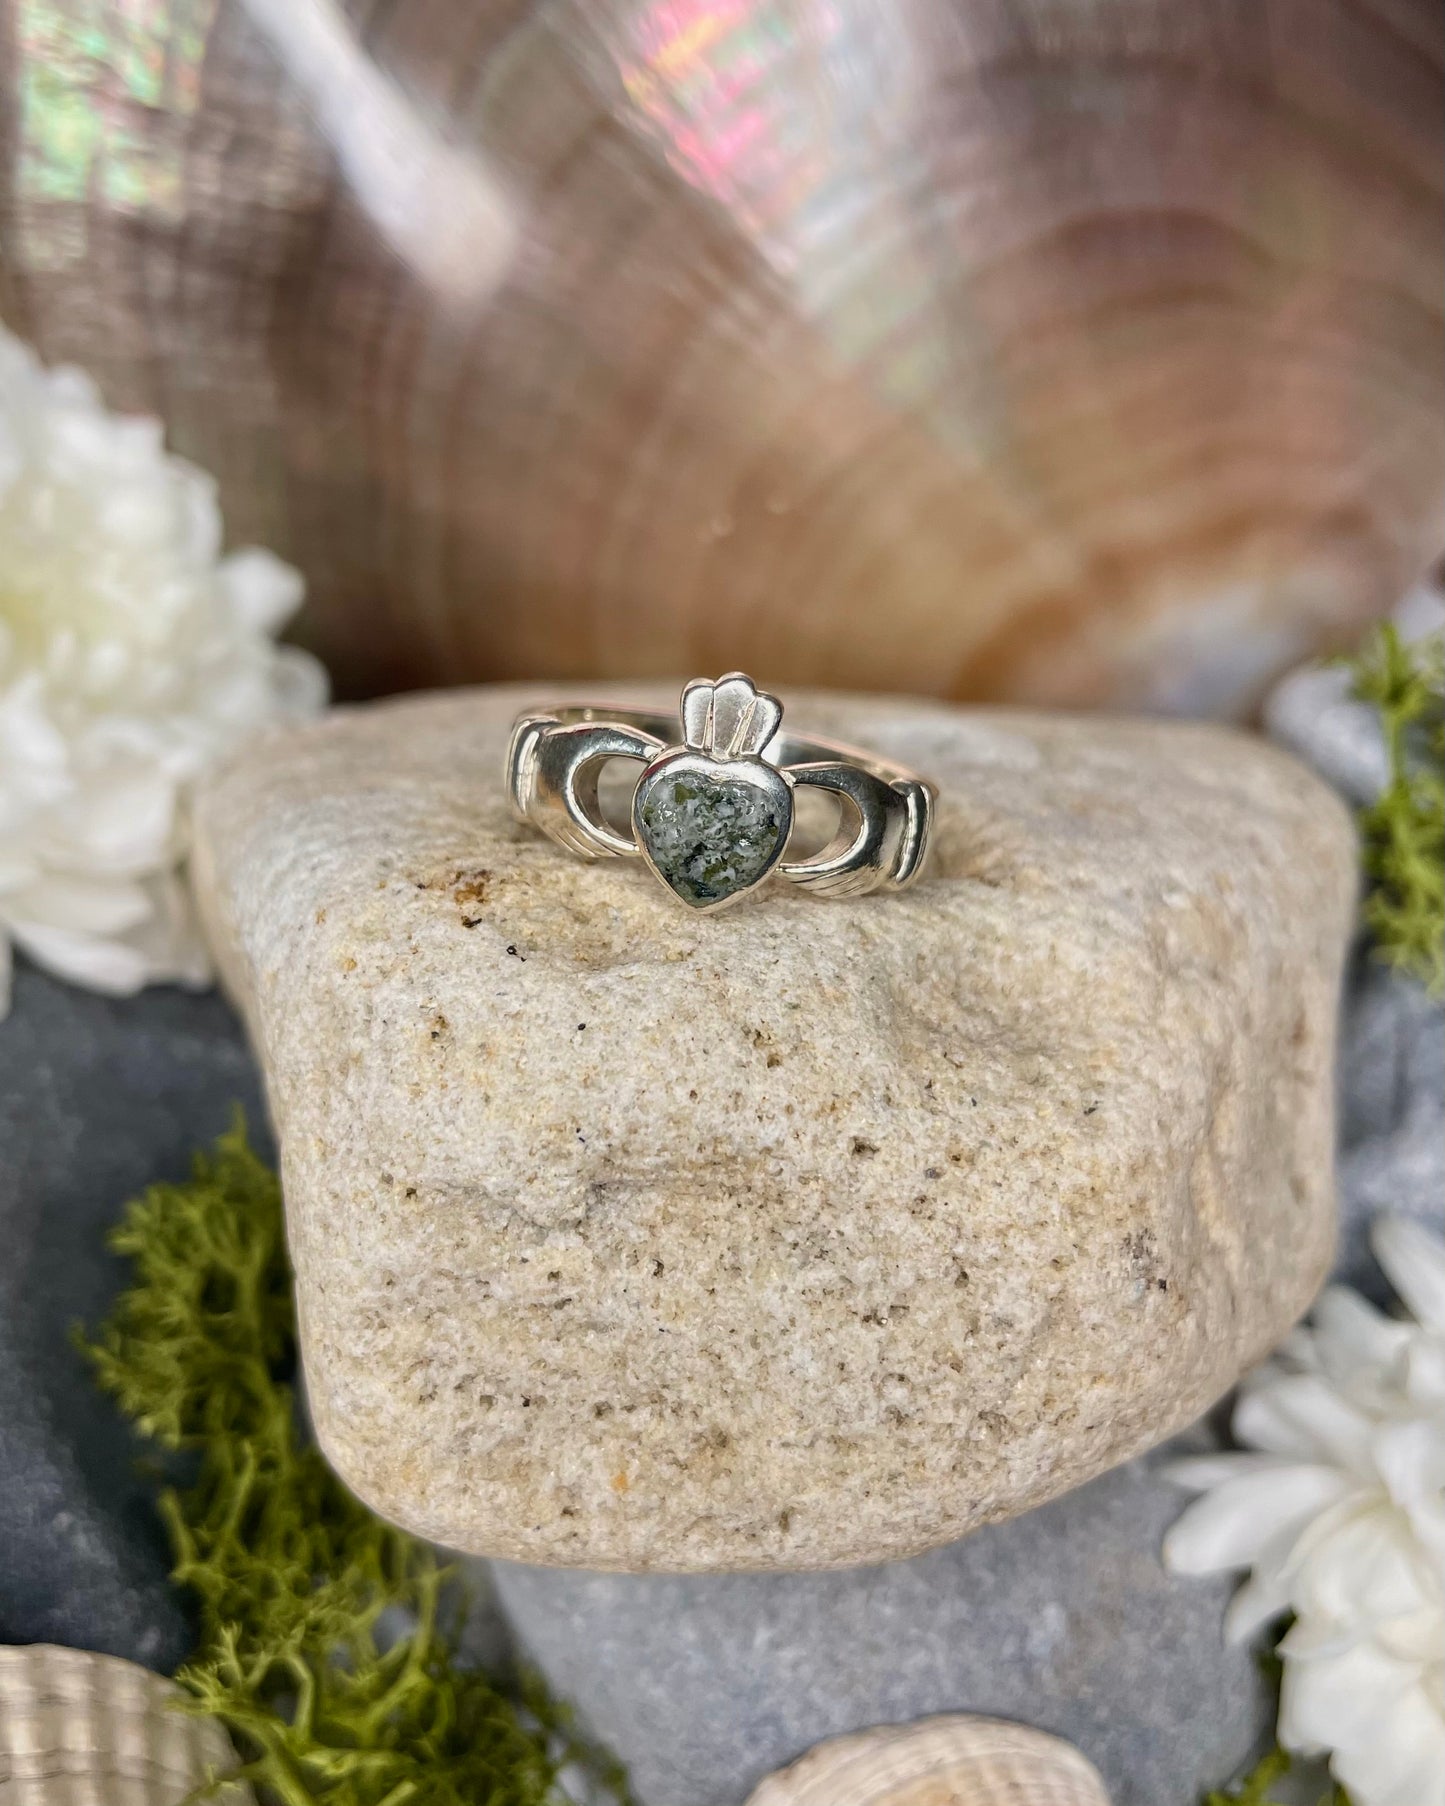 Connemara Marble Sterling Silver Claddagh Ring